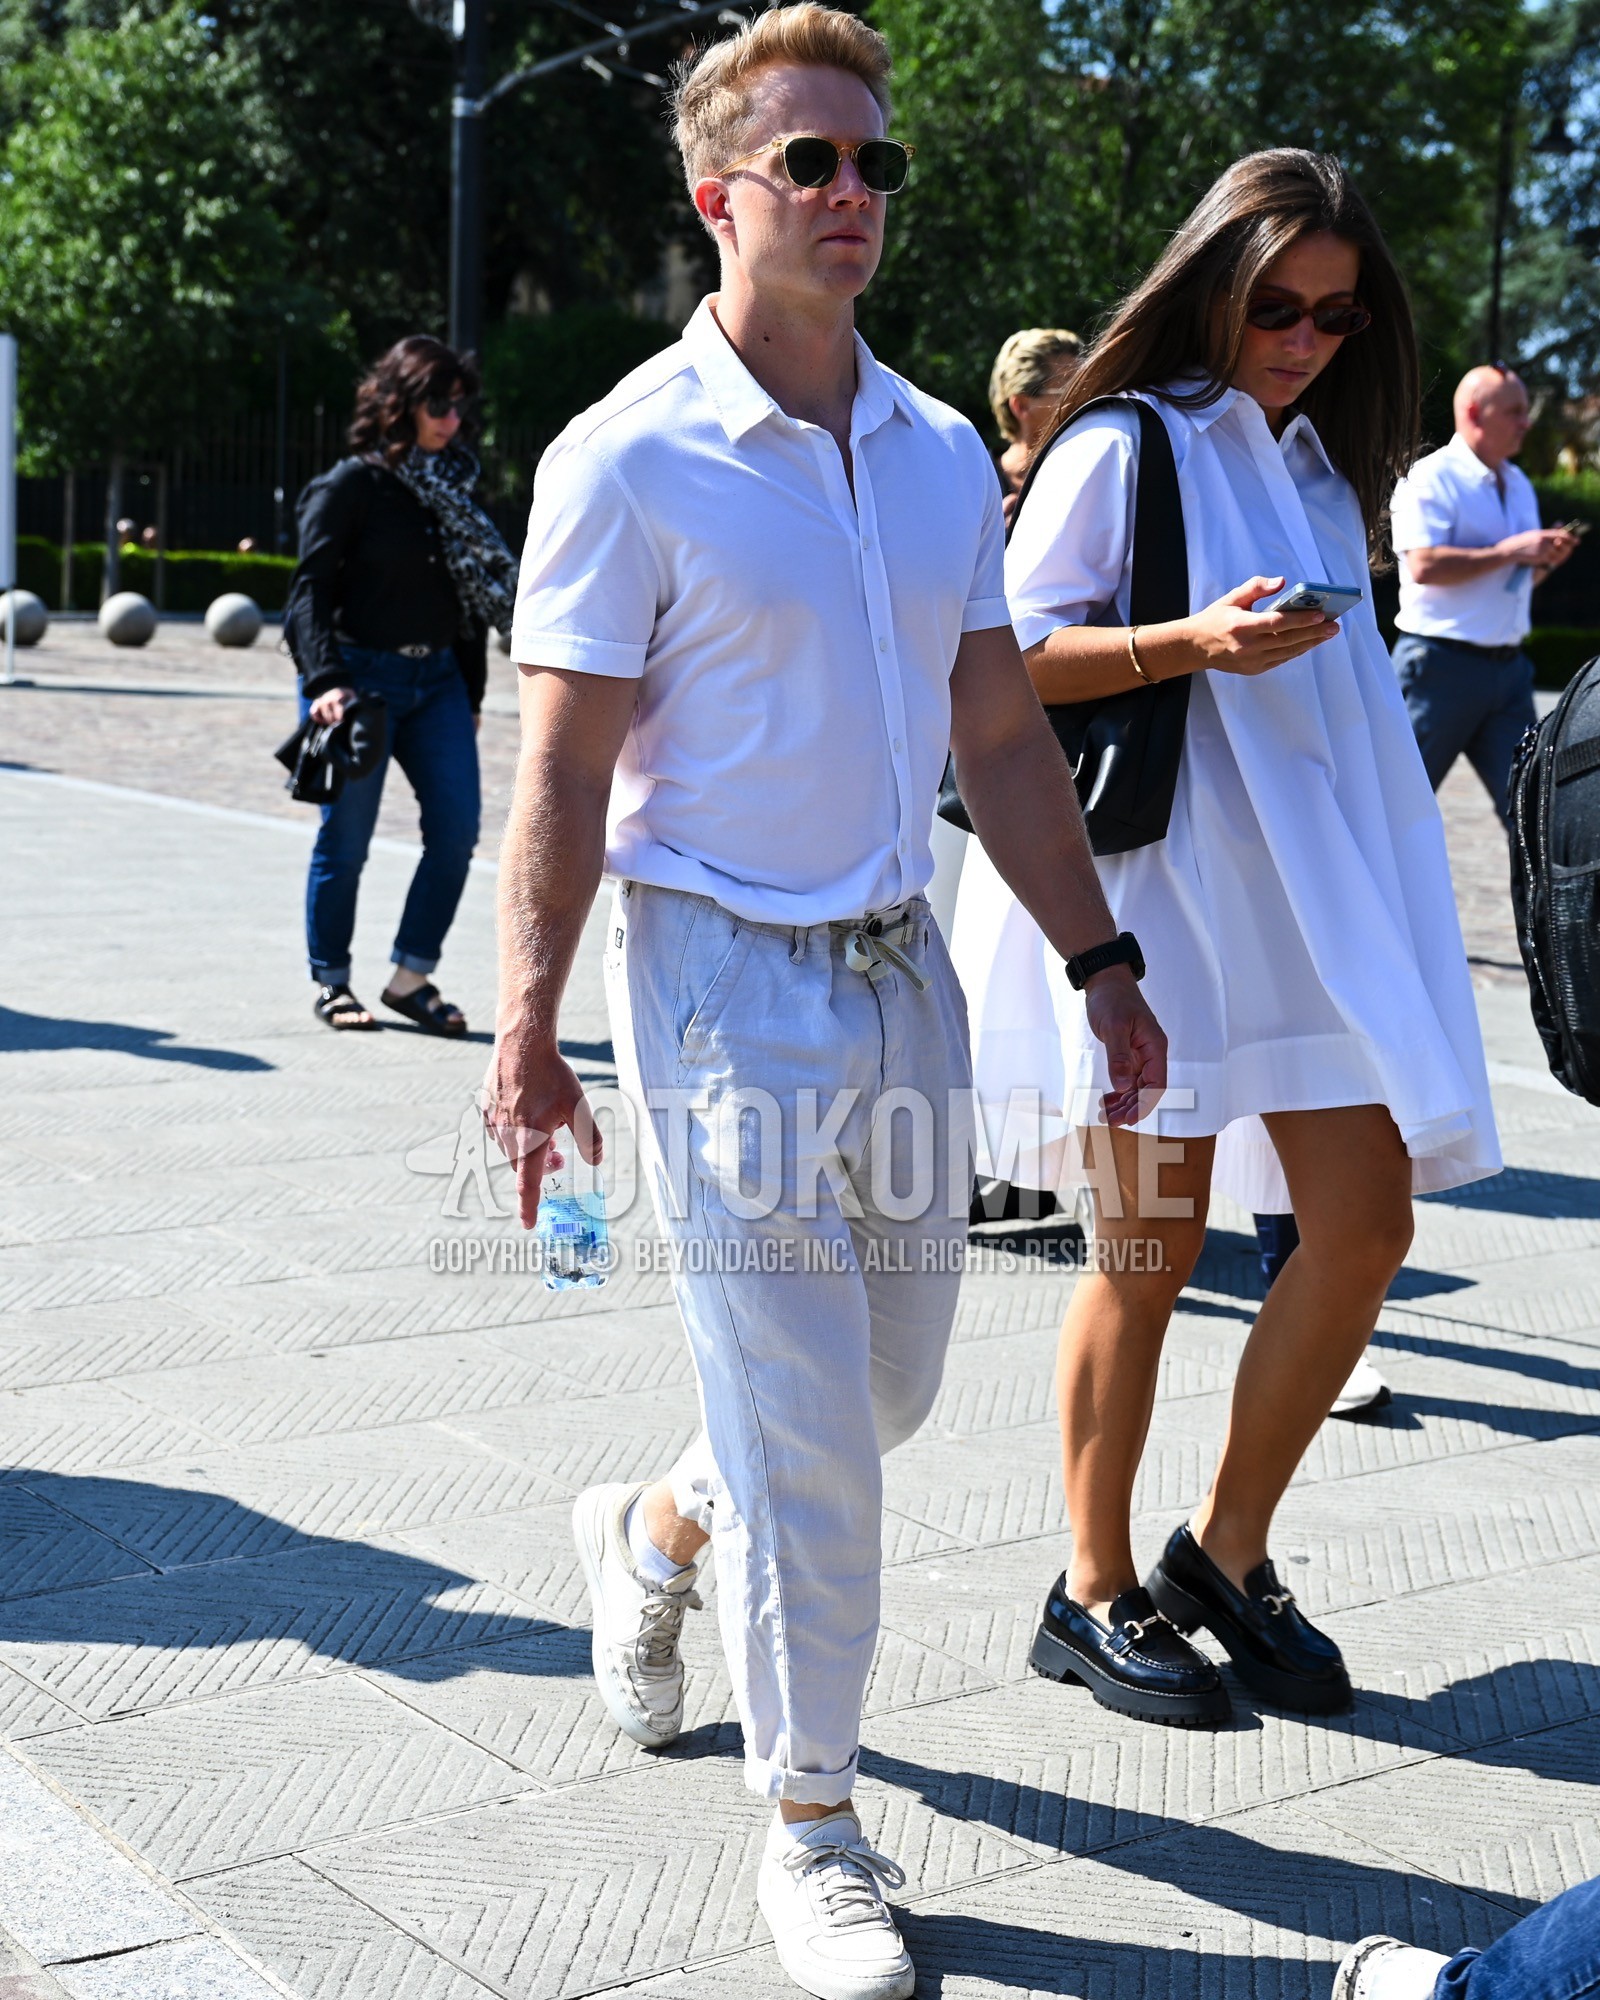 Men's spring summer outfit with black plain sunglasses, white plain shirt, white plain chinos, white low-cut sneakers.